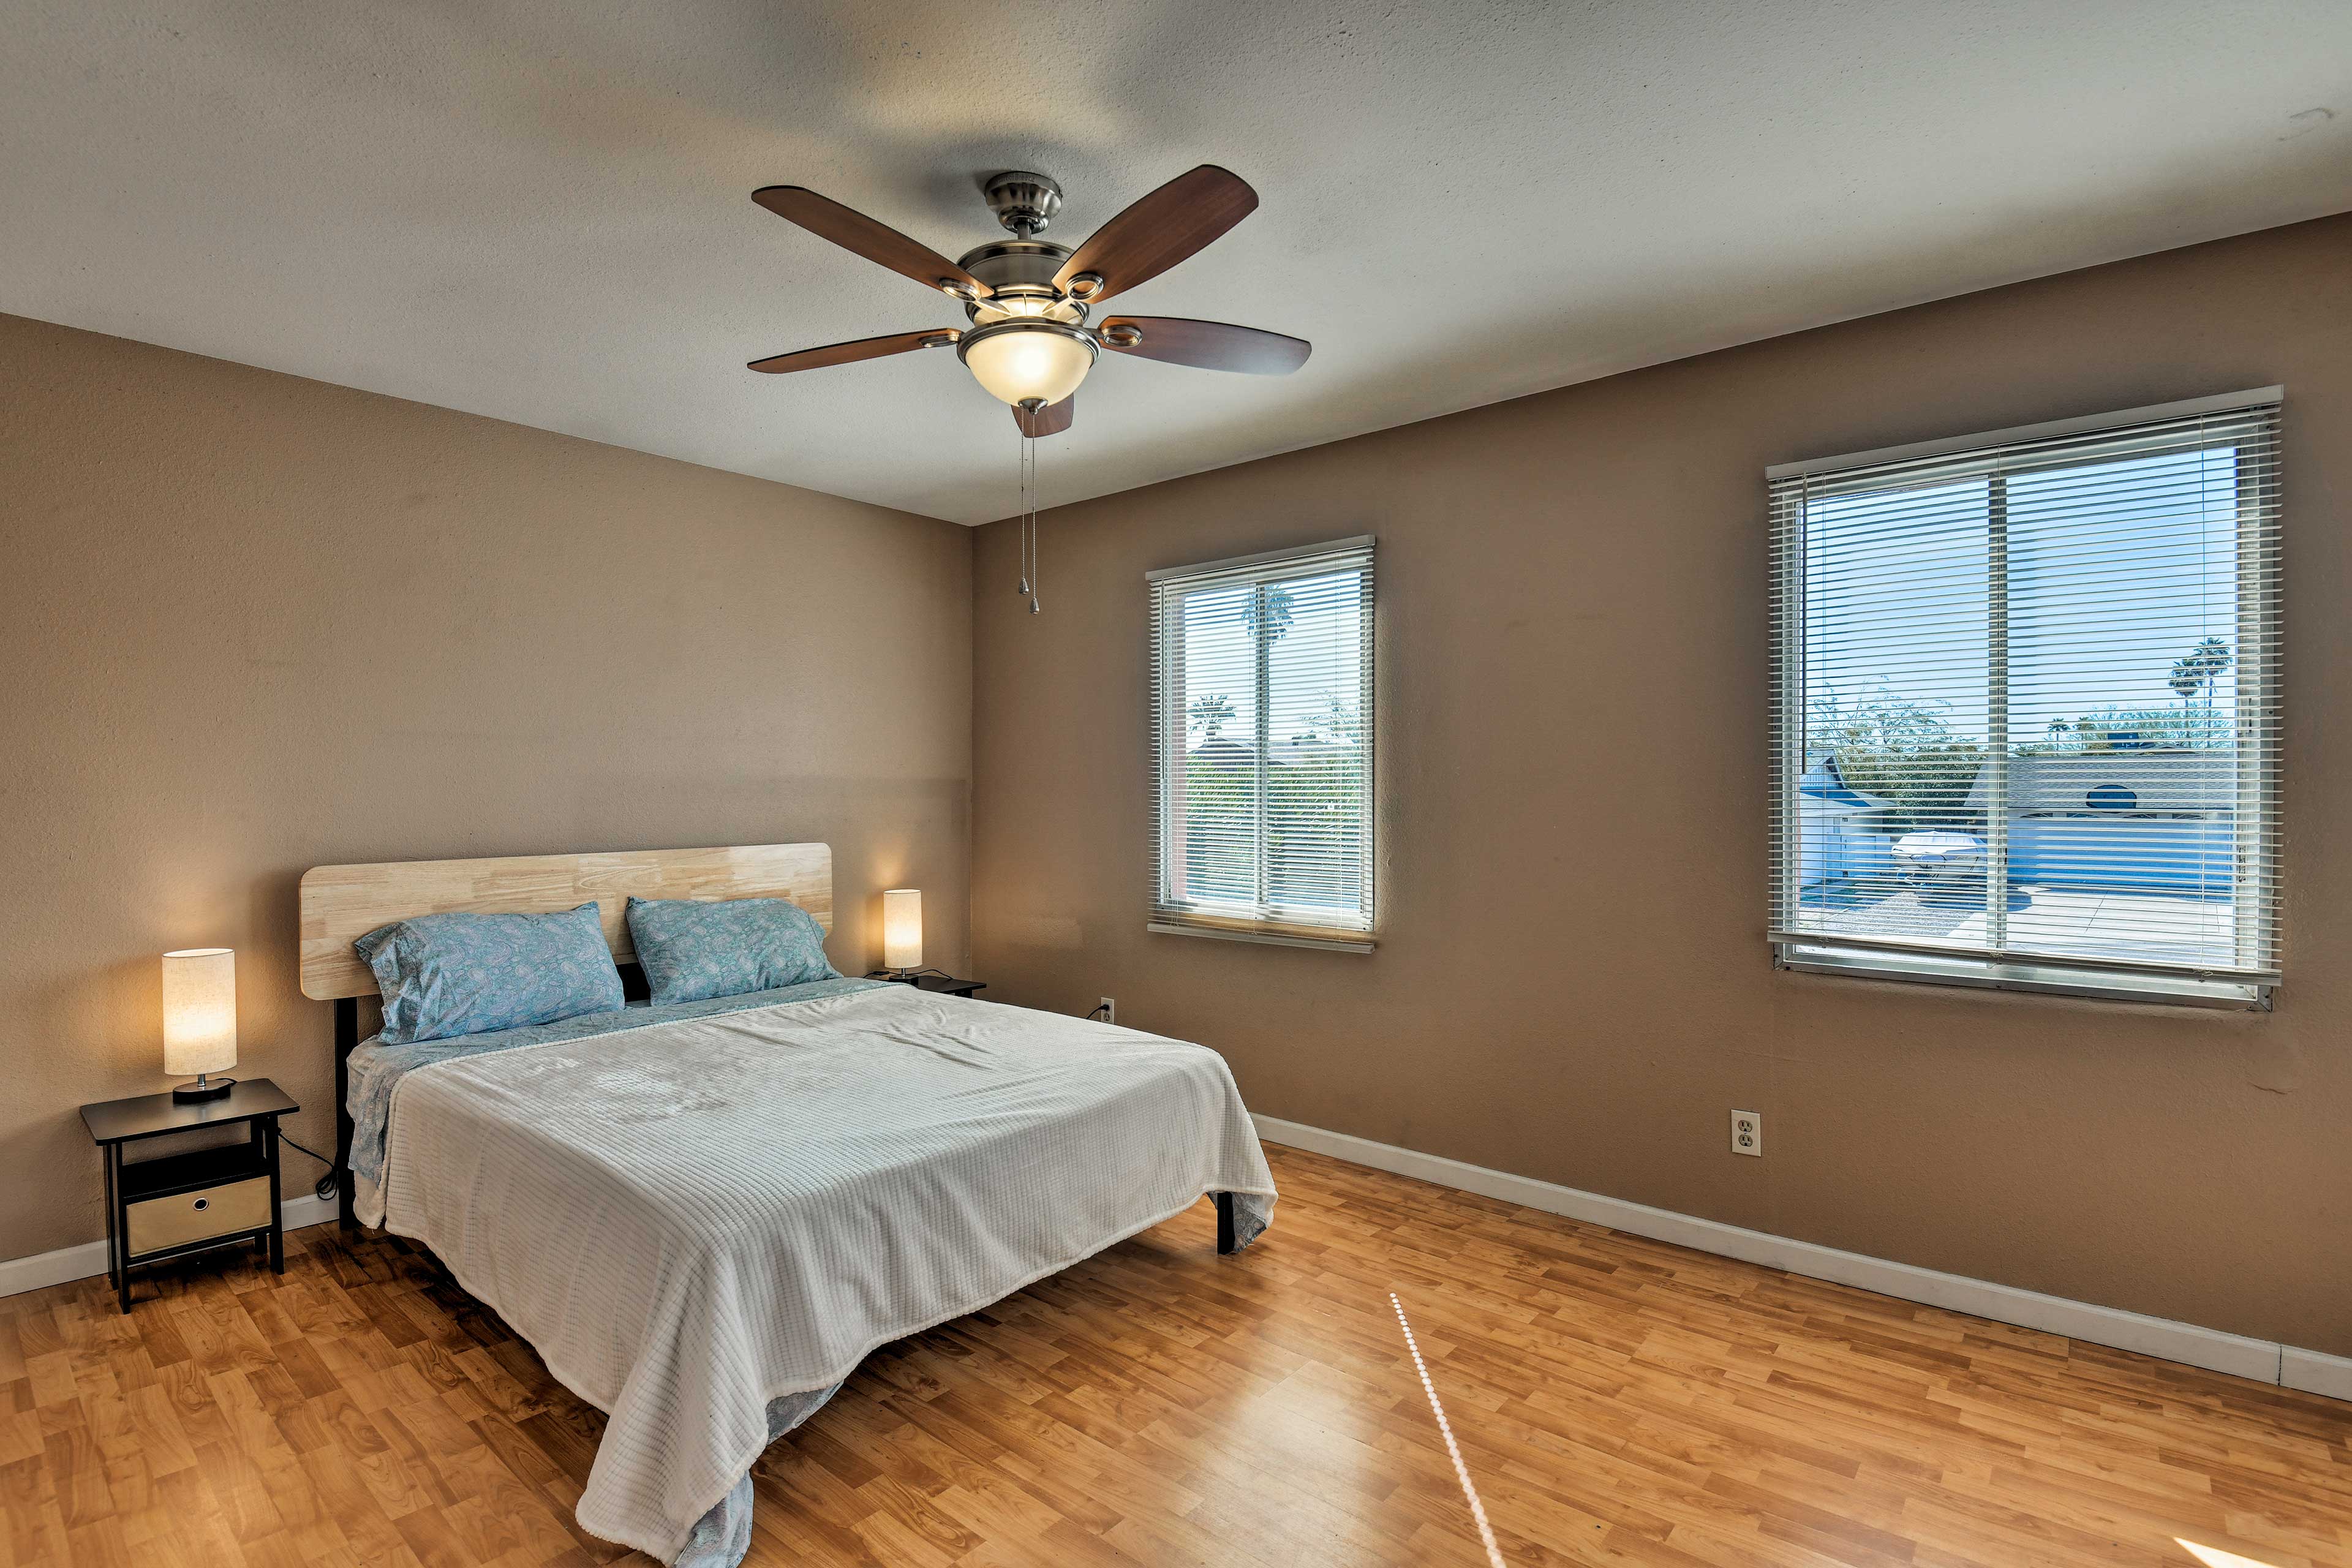 The bedroom suite is located upstairs and has plenty of natural sunlight.